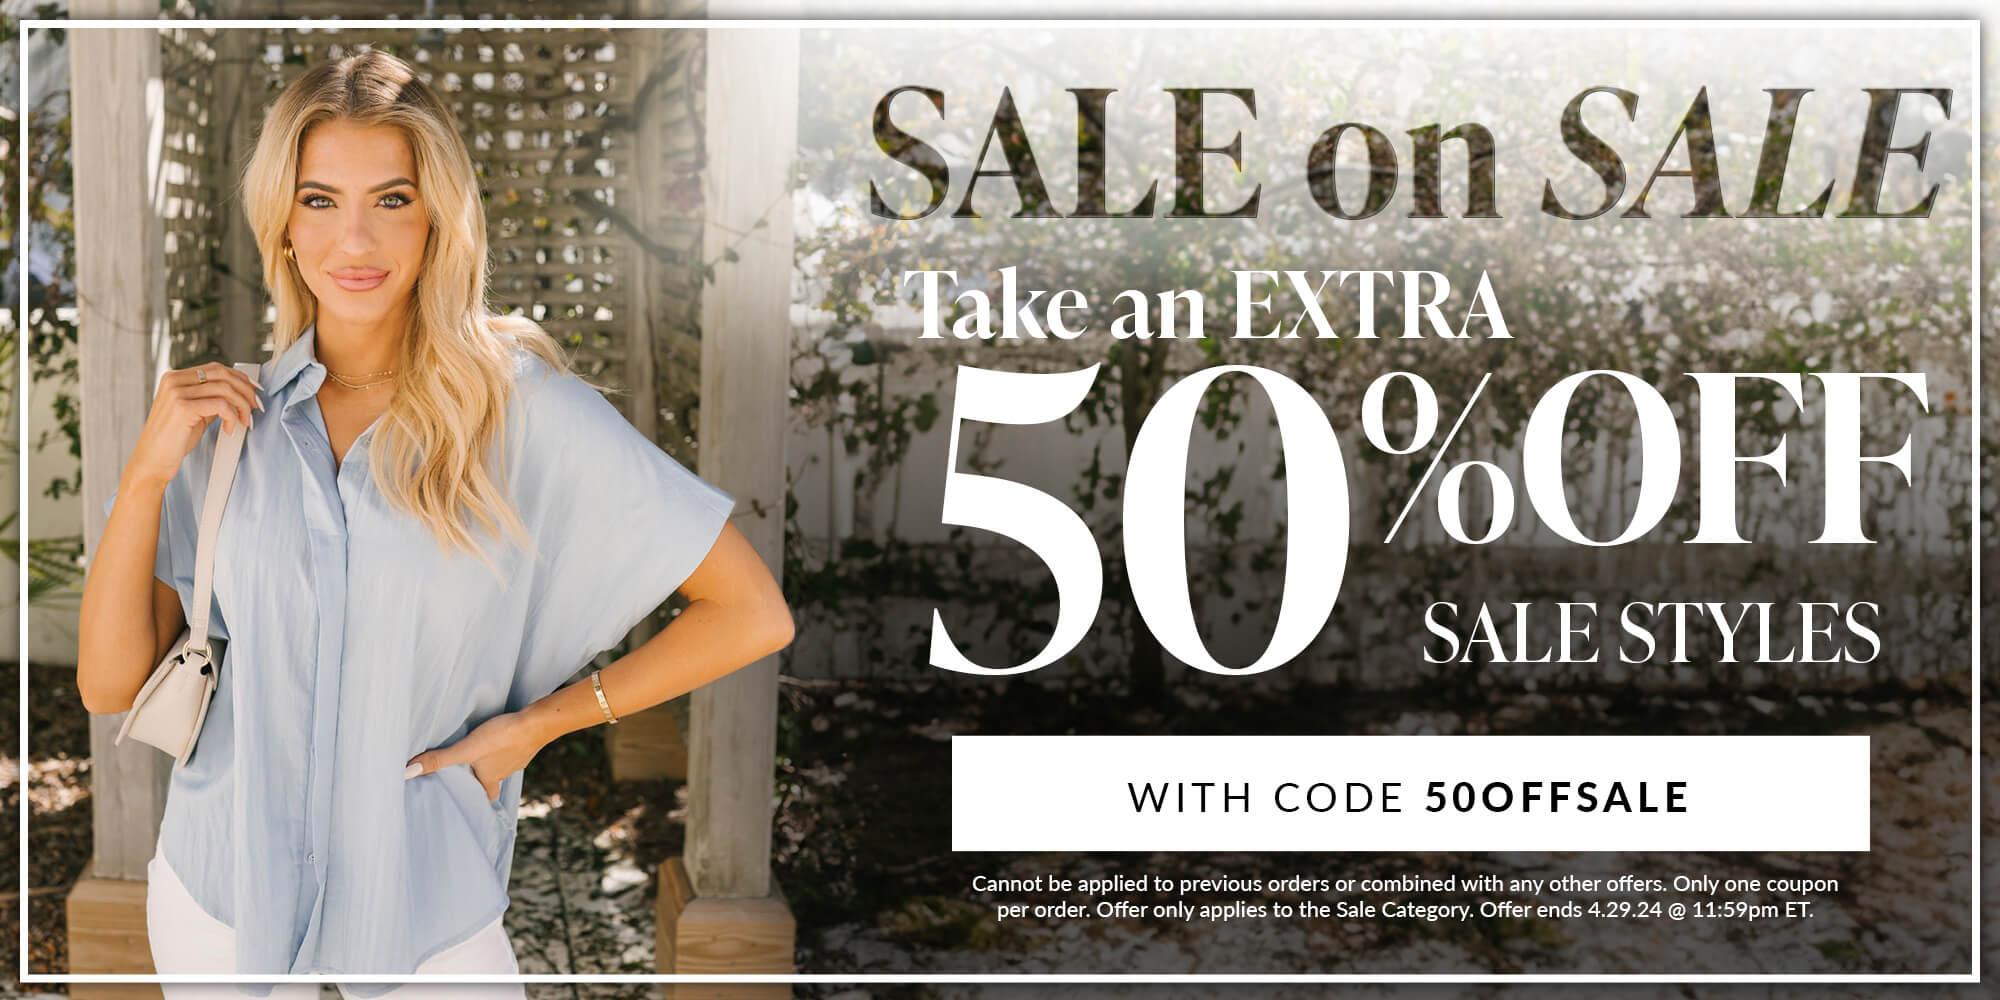 sale on sale take an additional 50% off sale styles shop with code 50OFFSALE Cannot be applied to previous orders or combined with any other offers. Only one coupon per order. Offer only applies to the Sale Category. Offer ends 4.29.24 @ 11:59pm ET.